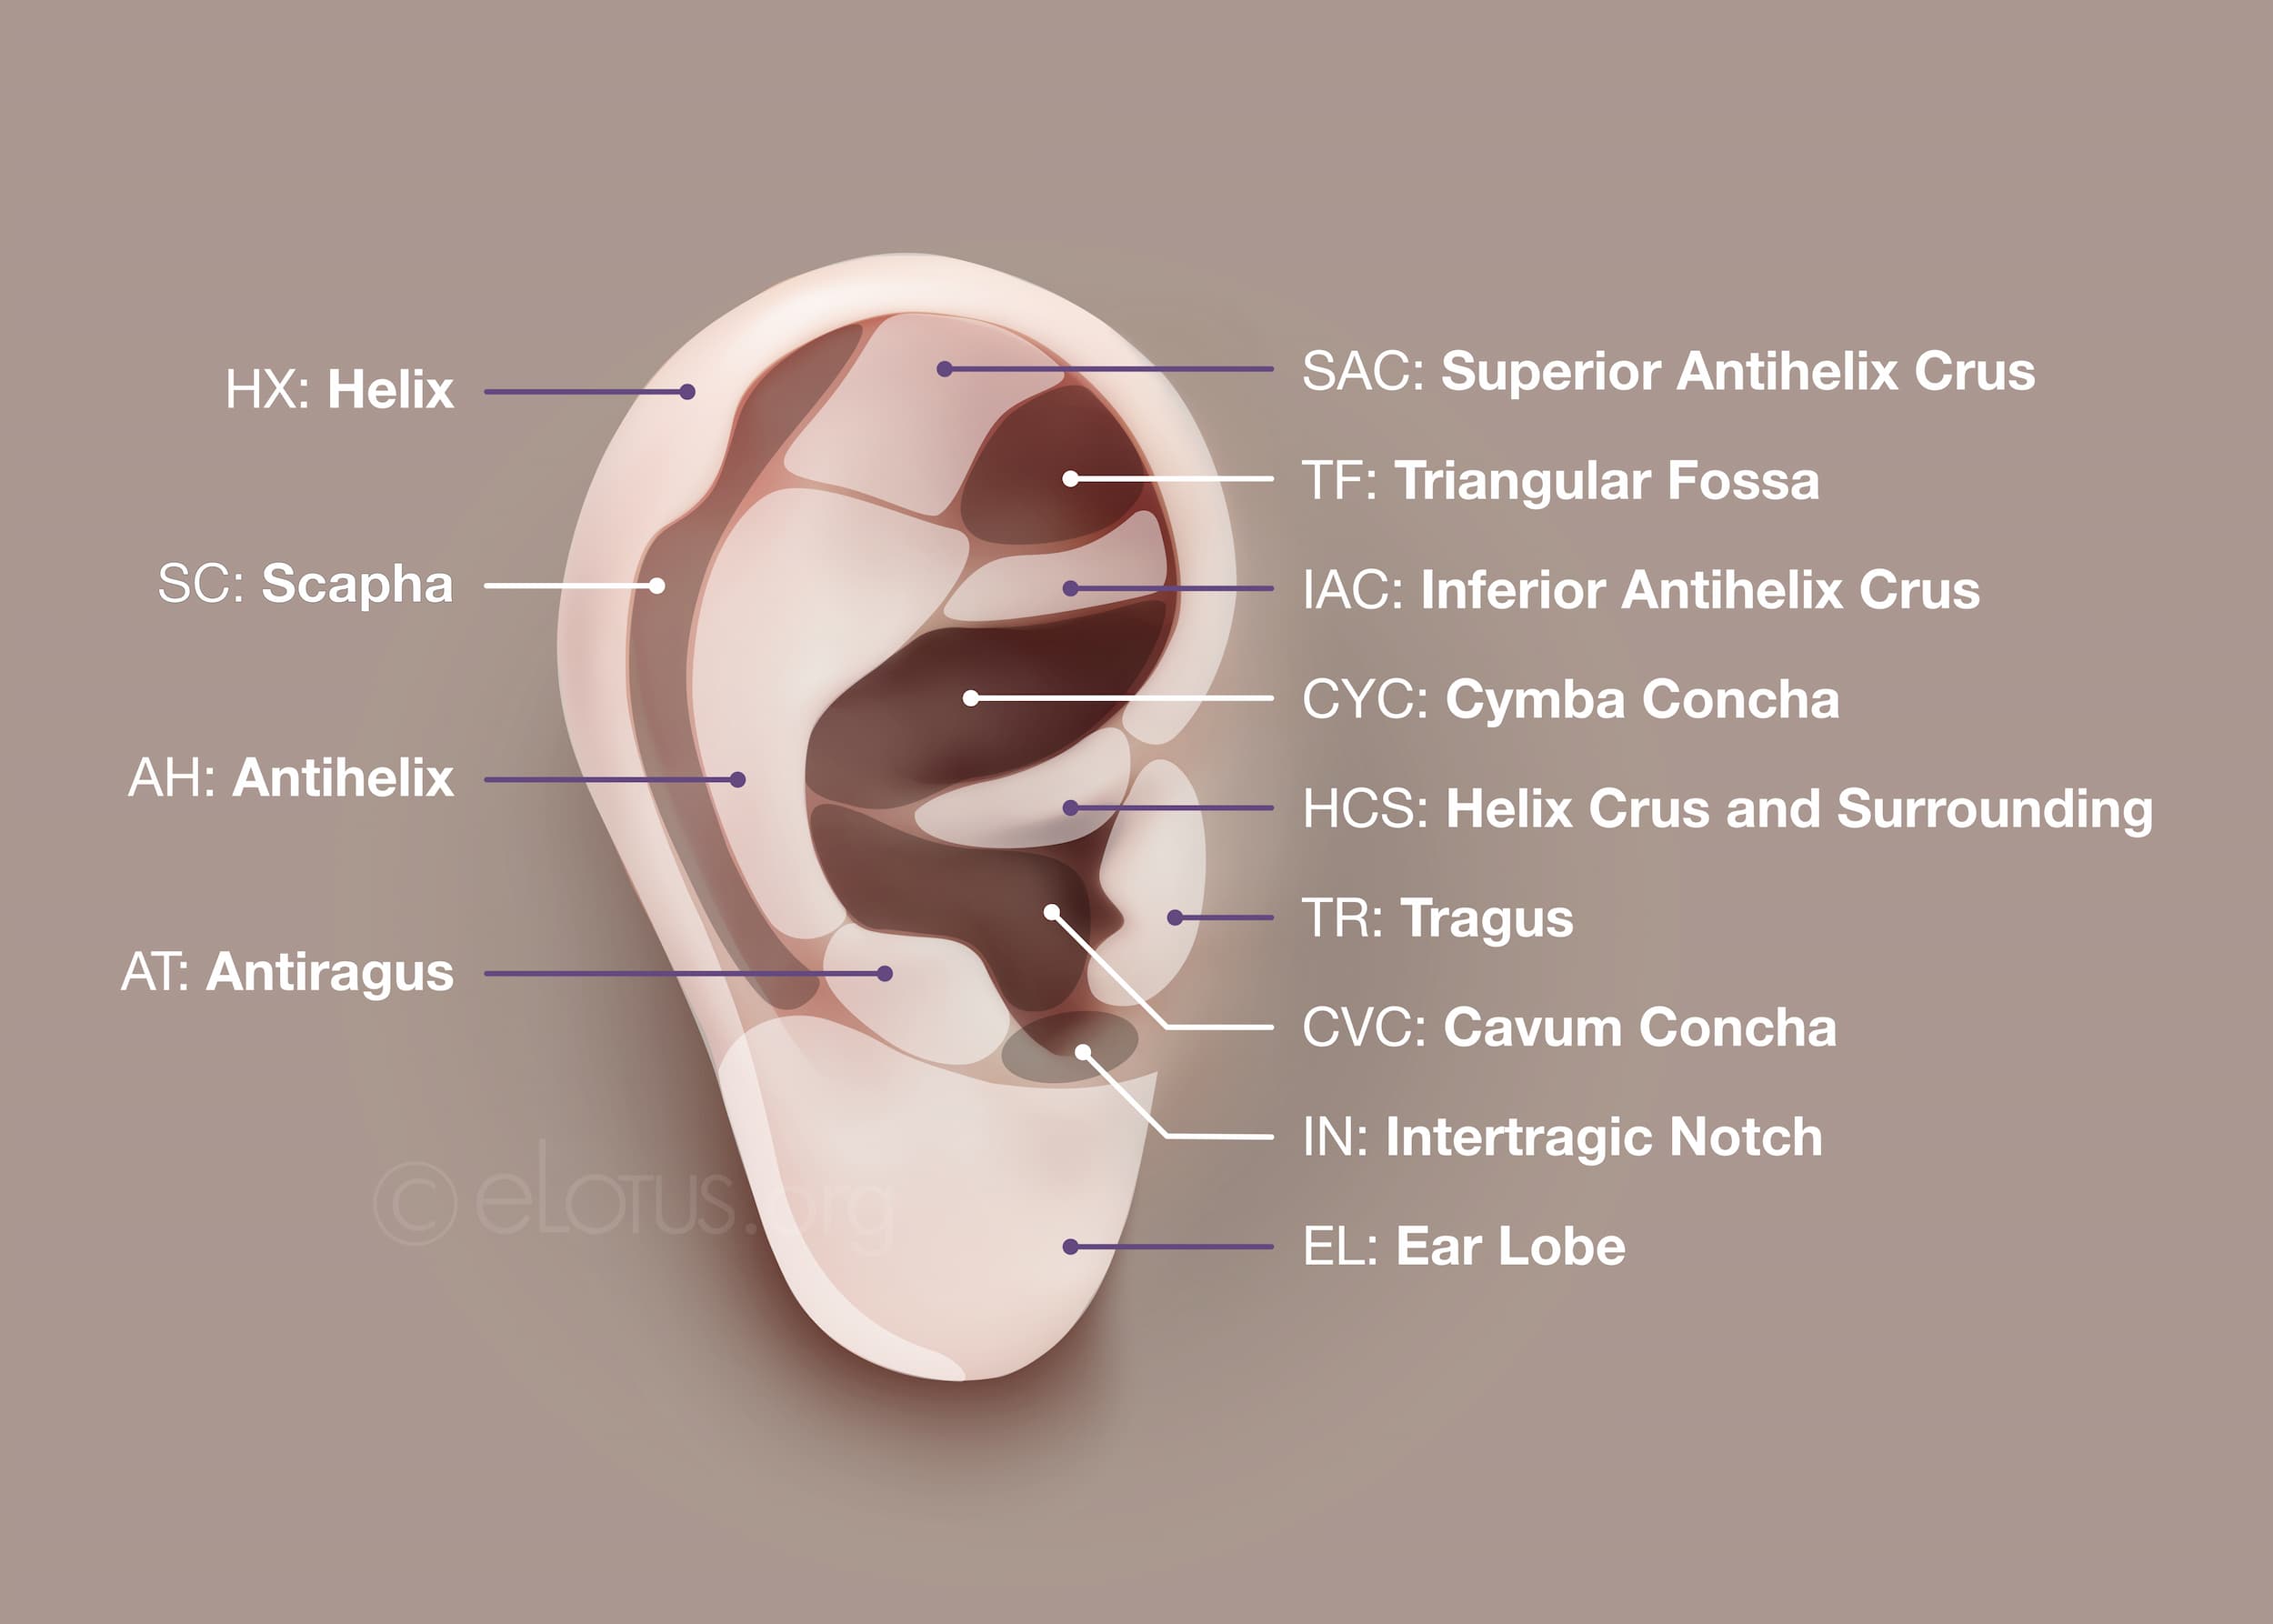 The organization of Dr. Li-Chun Huang&#039;s auricular points follows the anatomy of the outer ear